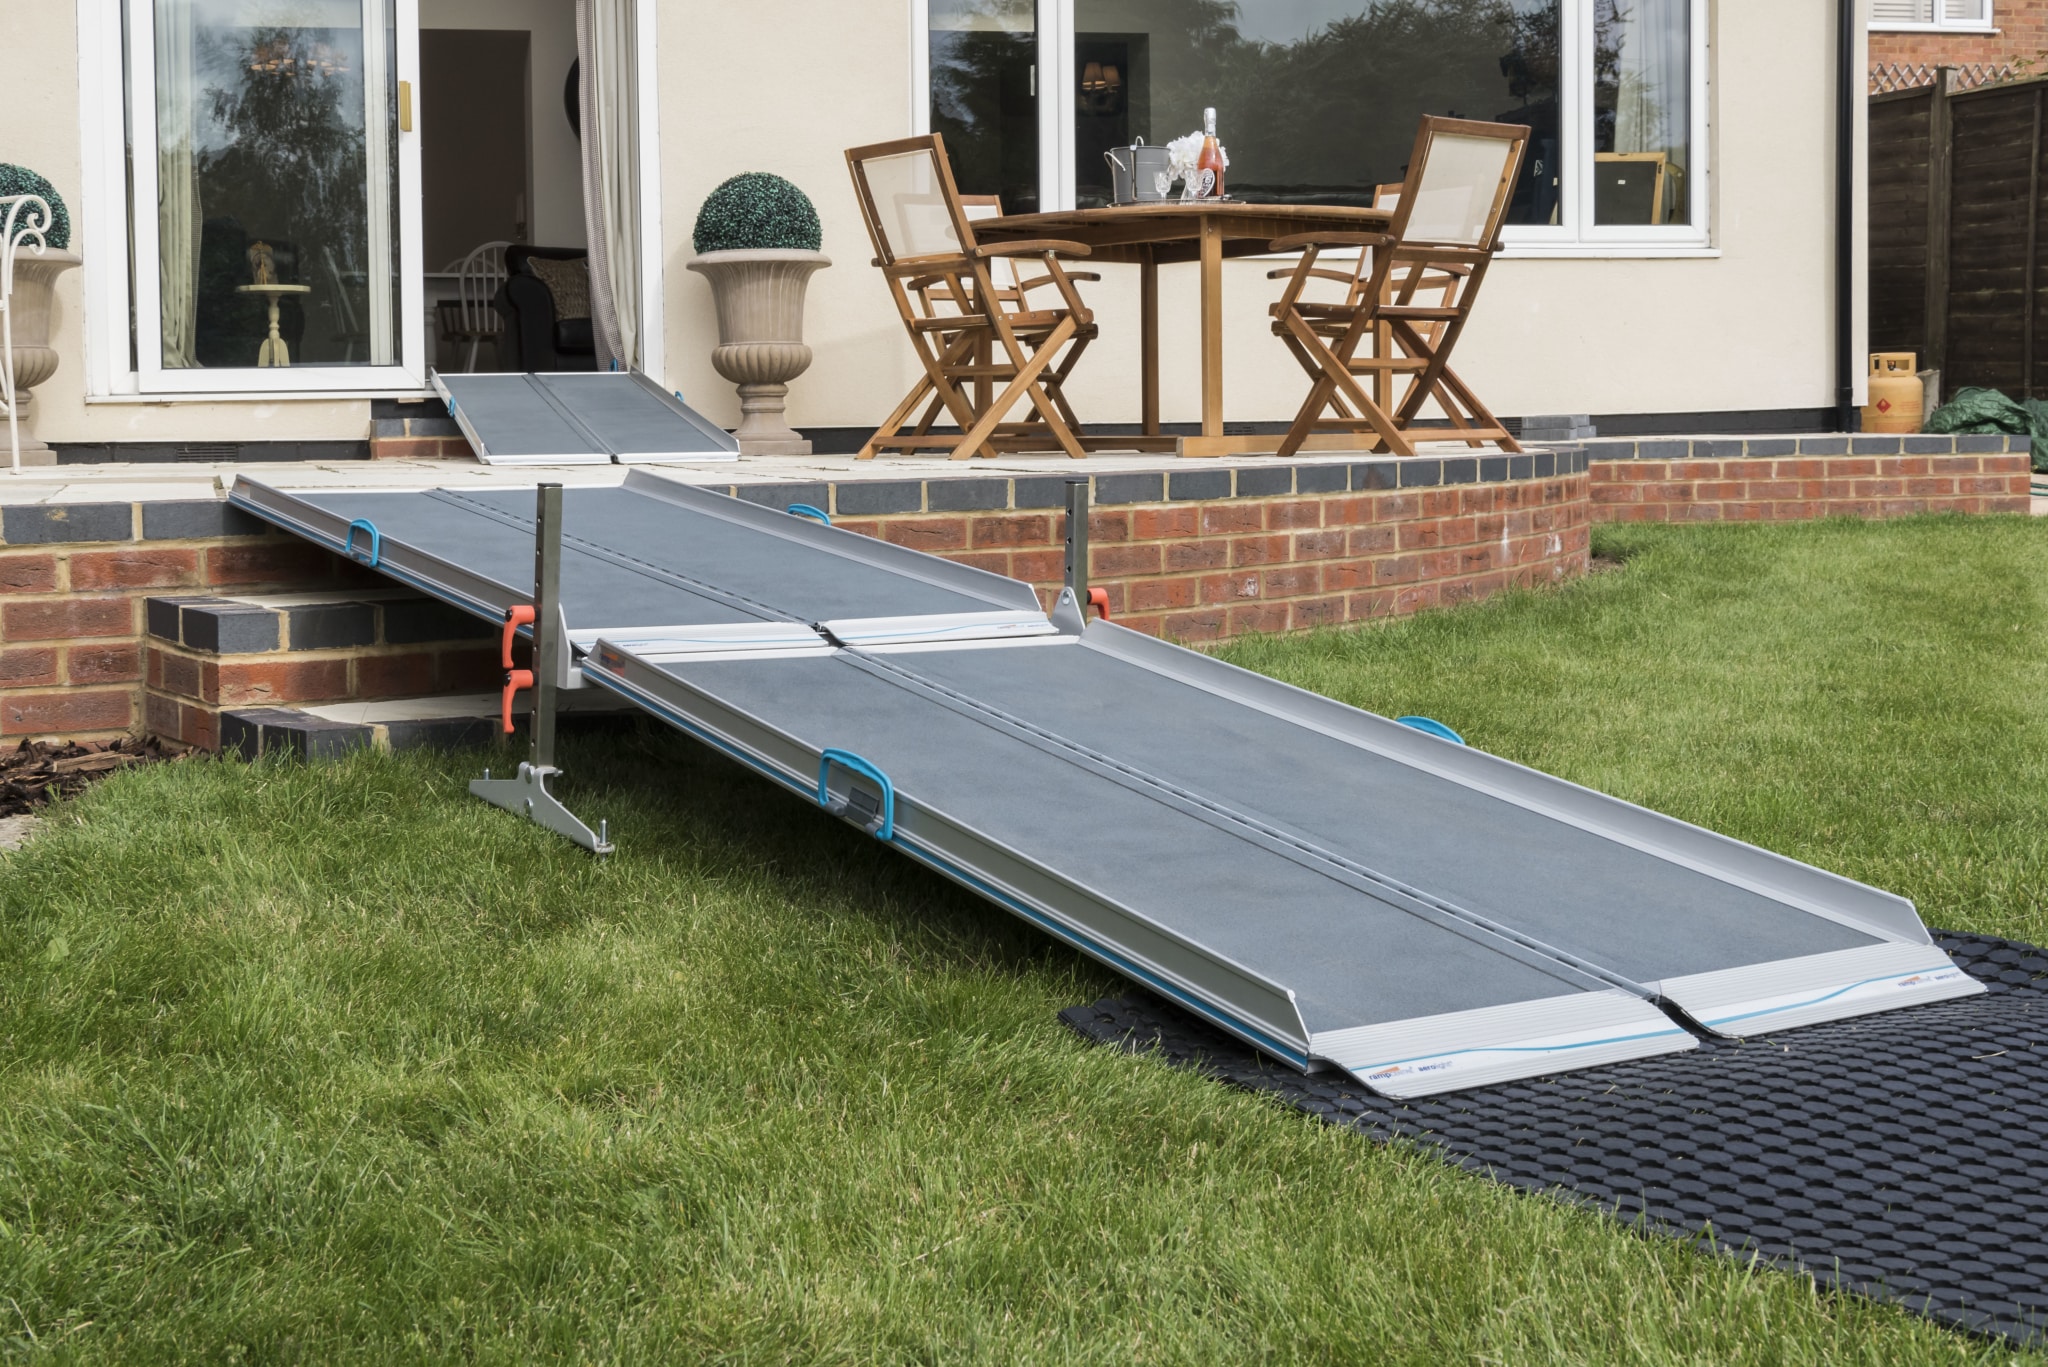 NEW Aerolight-High Rise combination ramp kit HR30 on lawn leading up steps onto patio